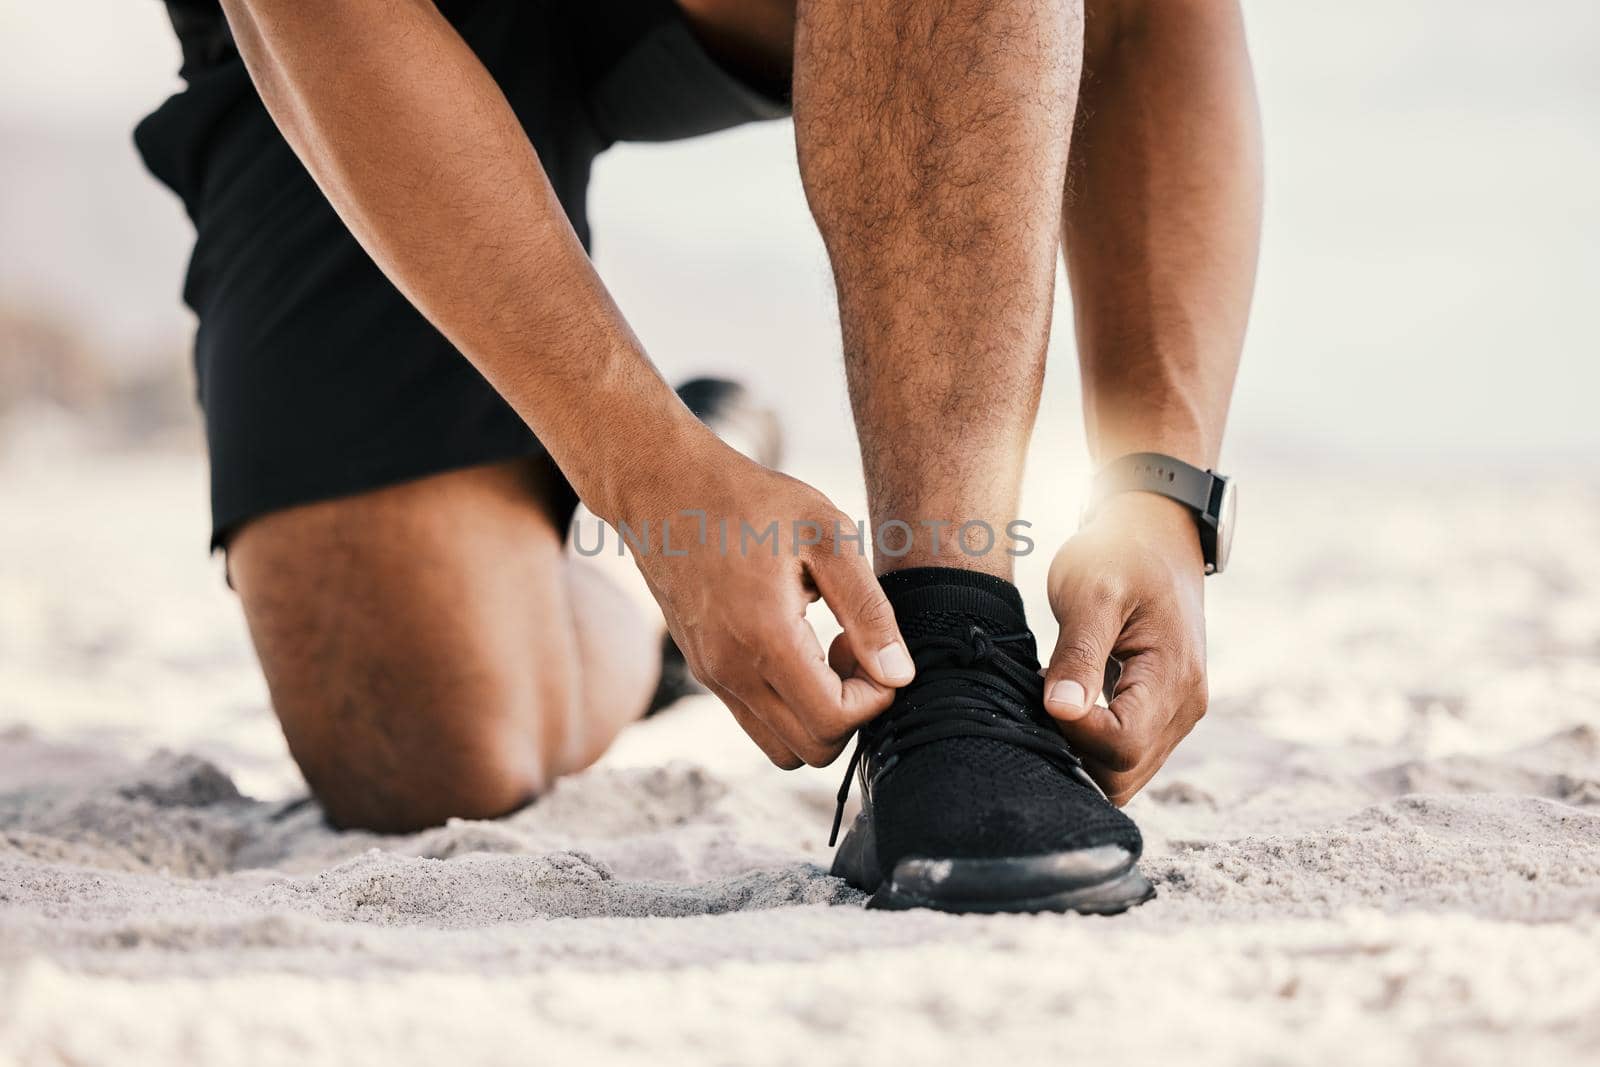 Cropped shot of an unrecognizable man tying his shoelaces while out for a workout.